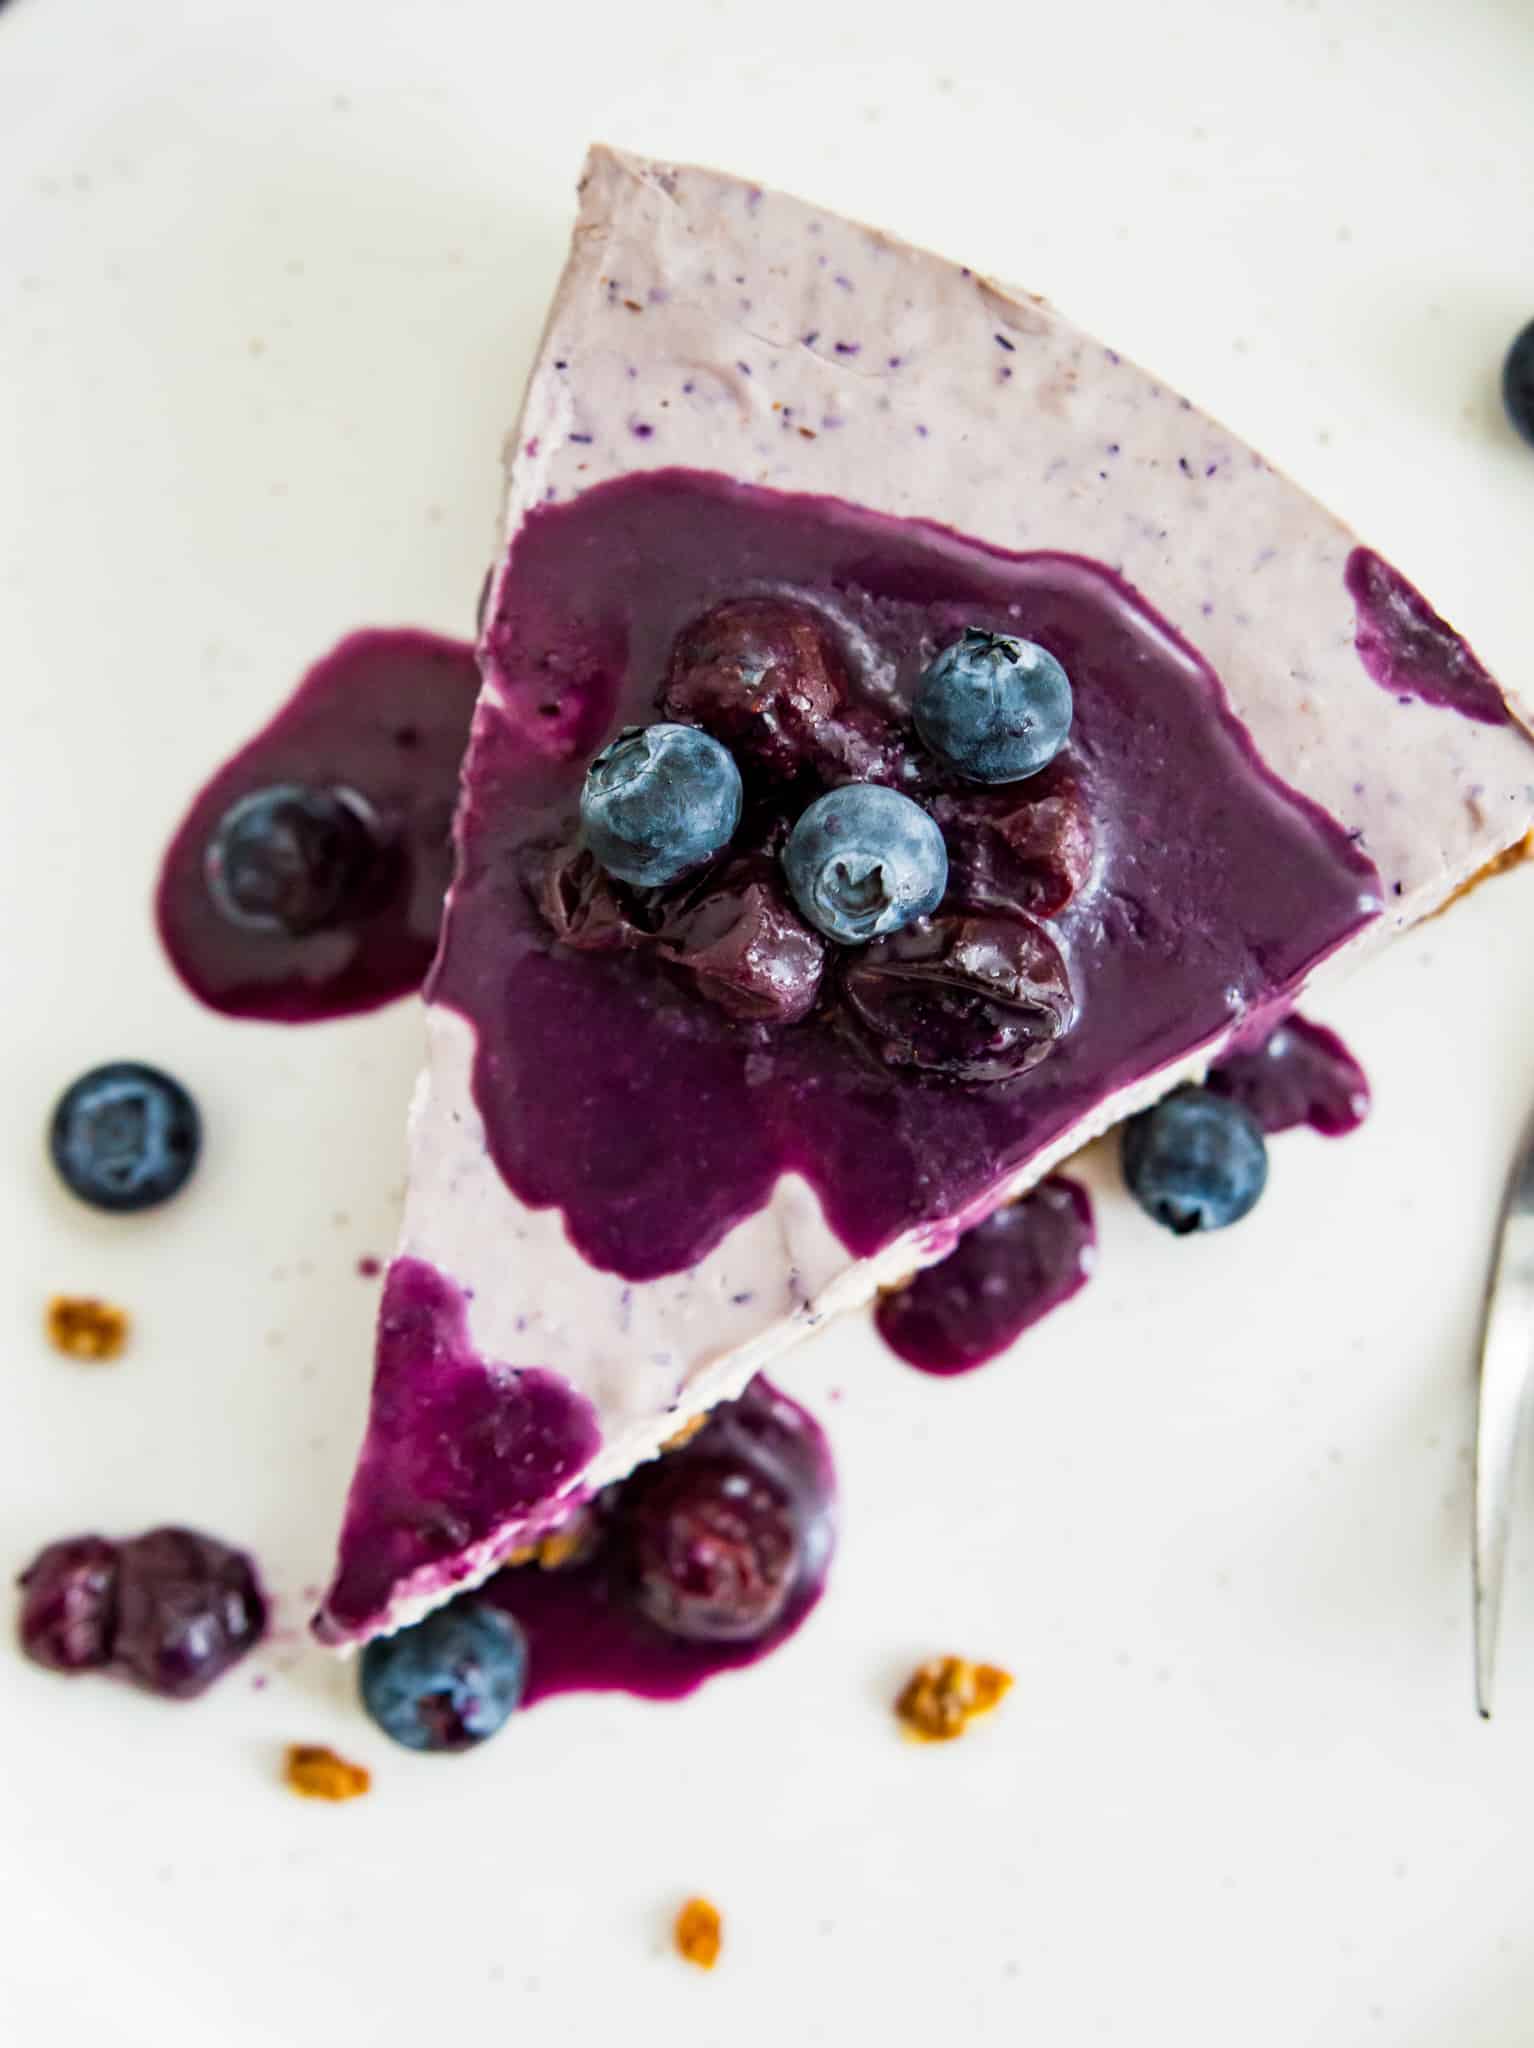 A slice of dairy free blueberry cheesecake on a plate topped with fresh blueberries and blueberry sauce.